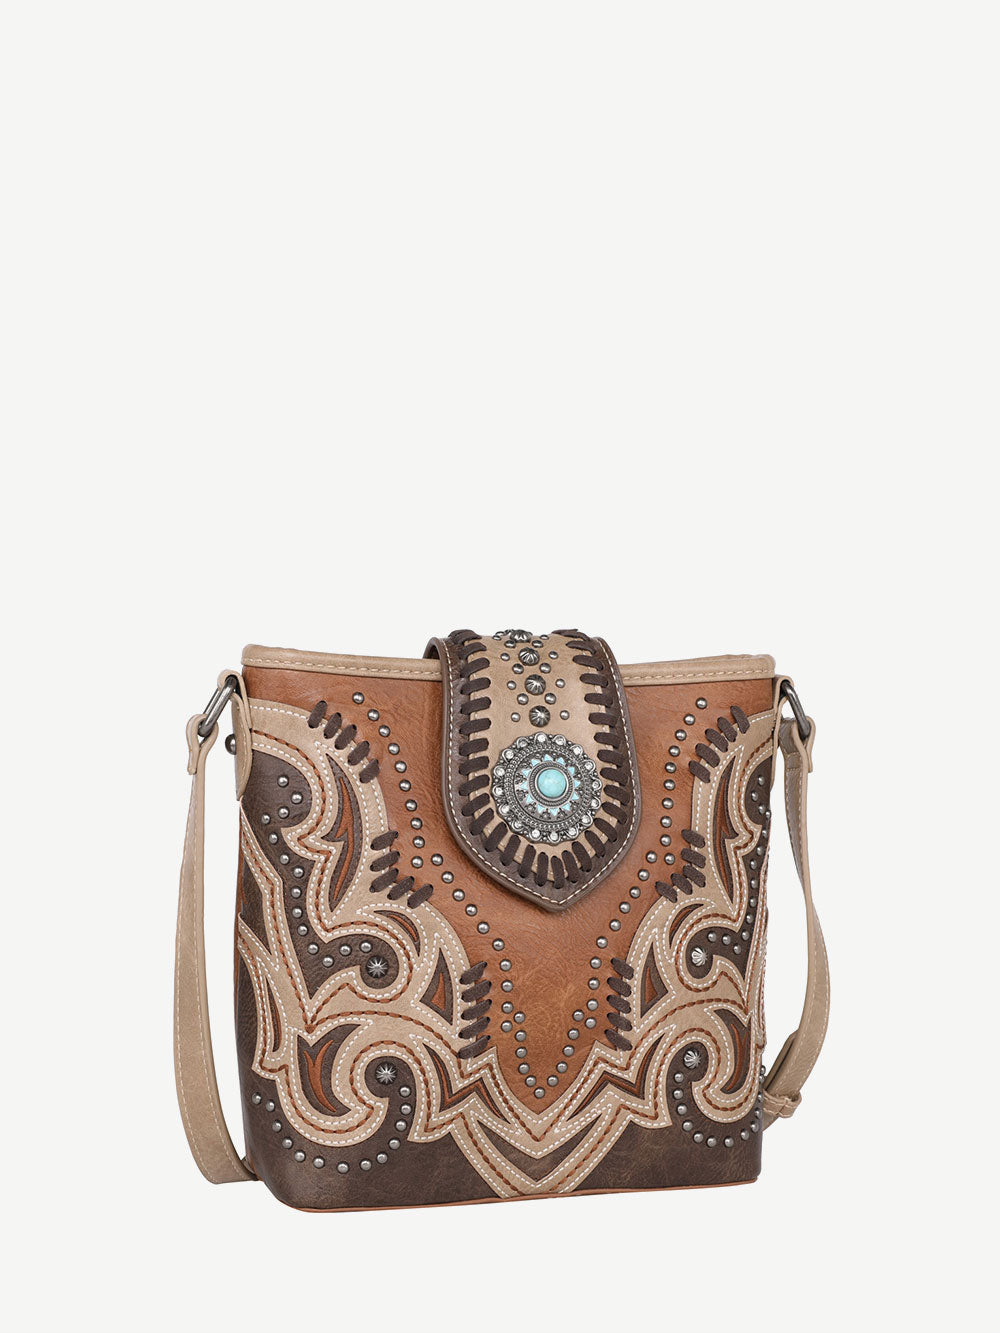 Montana West Laser Cut-out Buckle Concealed Carry Crossbody Bag Set - Montana West World